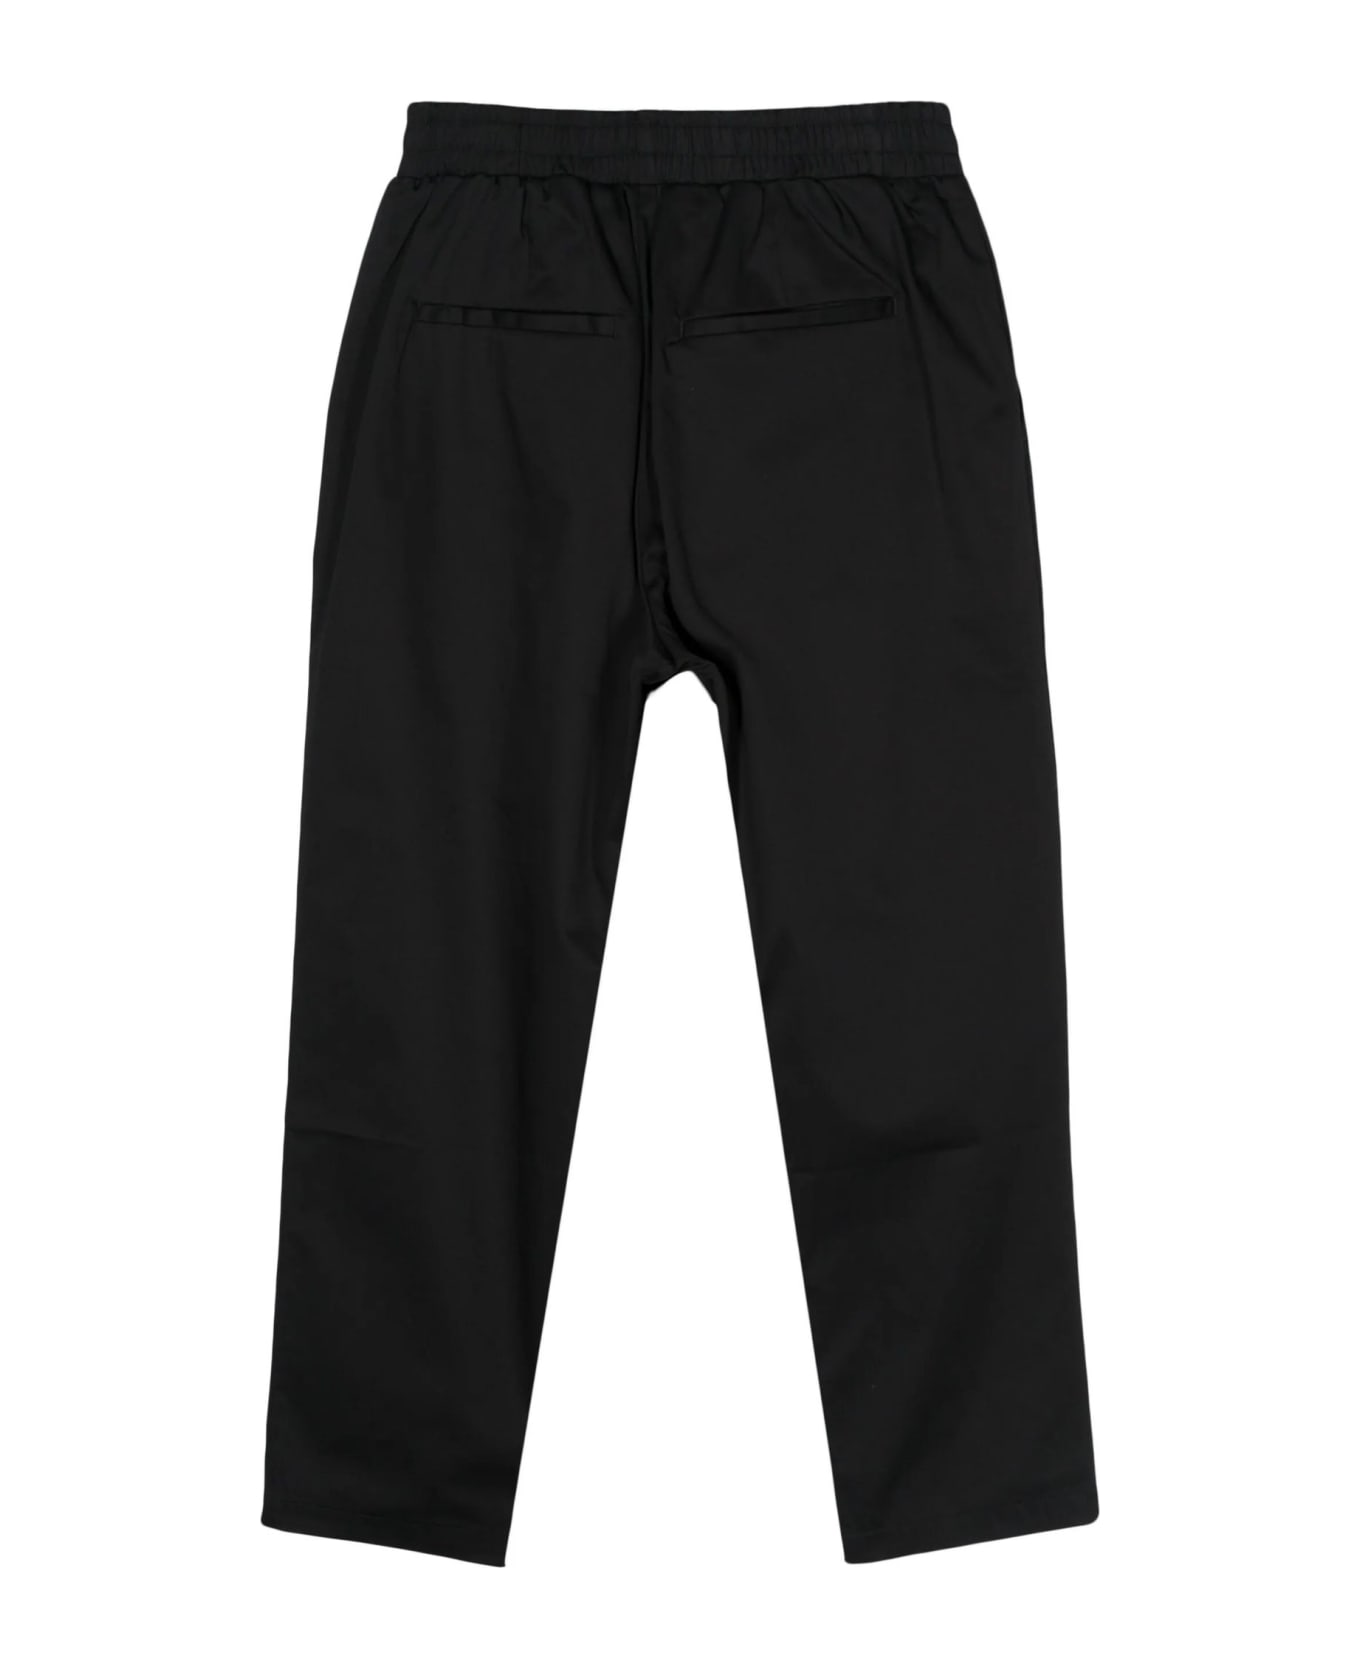 Family First Milano Black Stretch-cotton Trousers - BLACK ボトムス